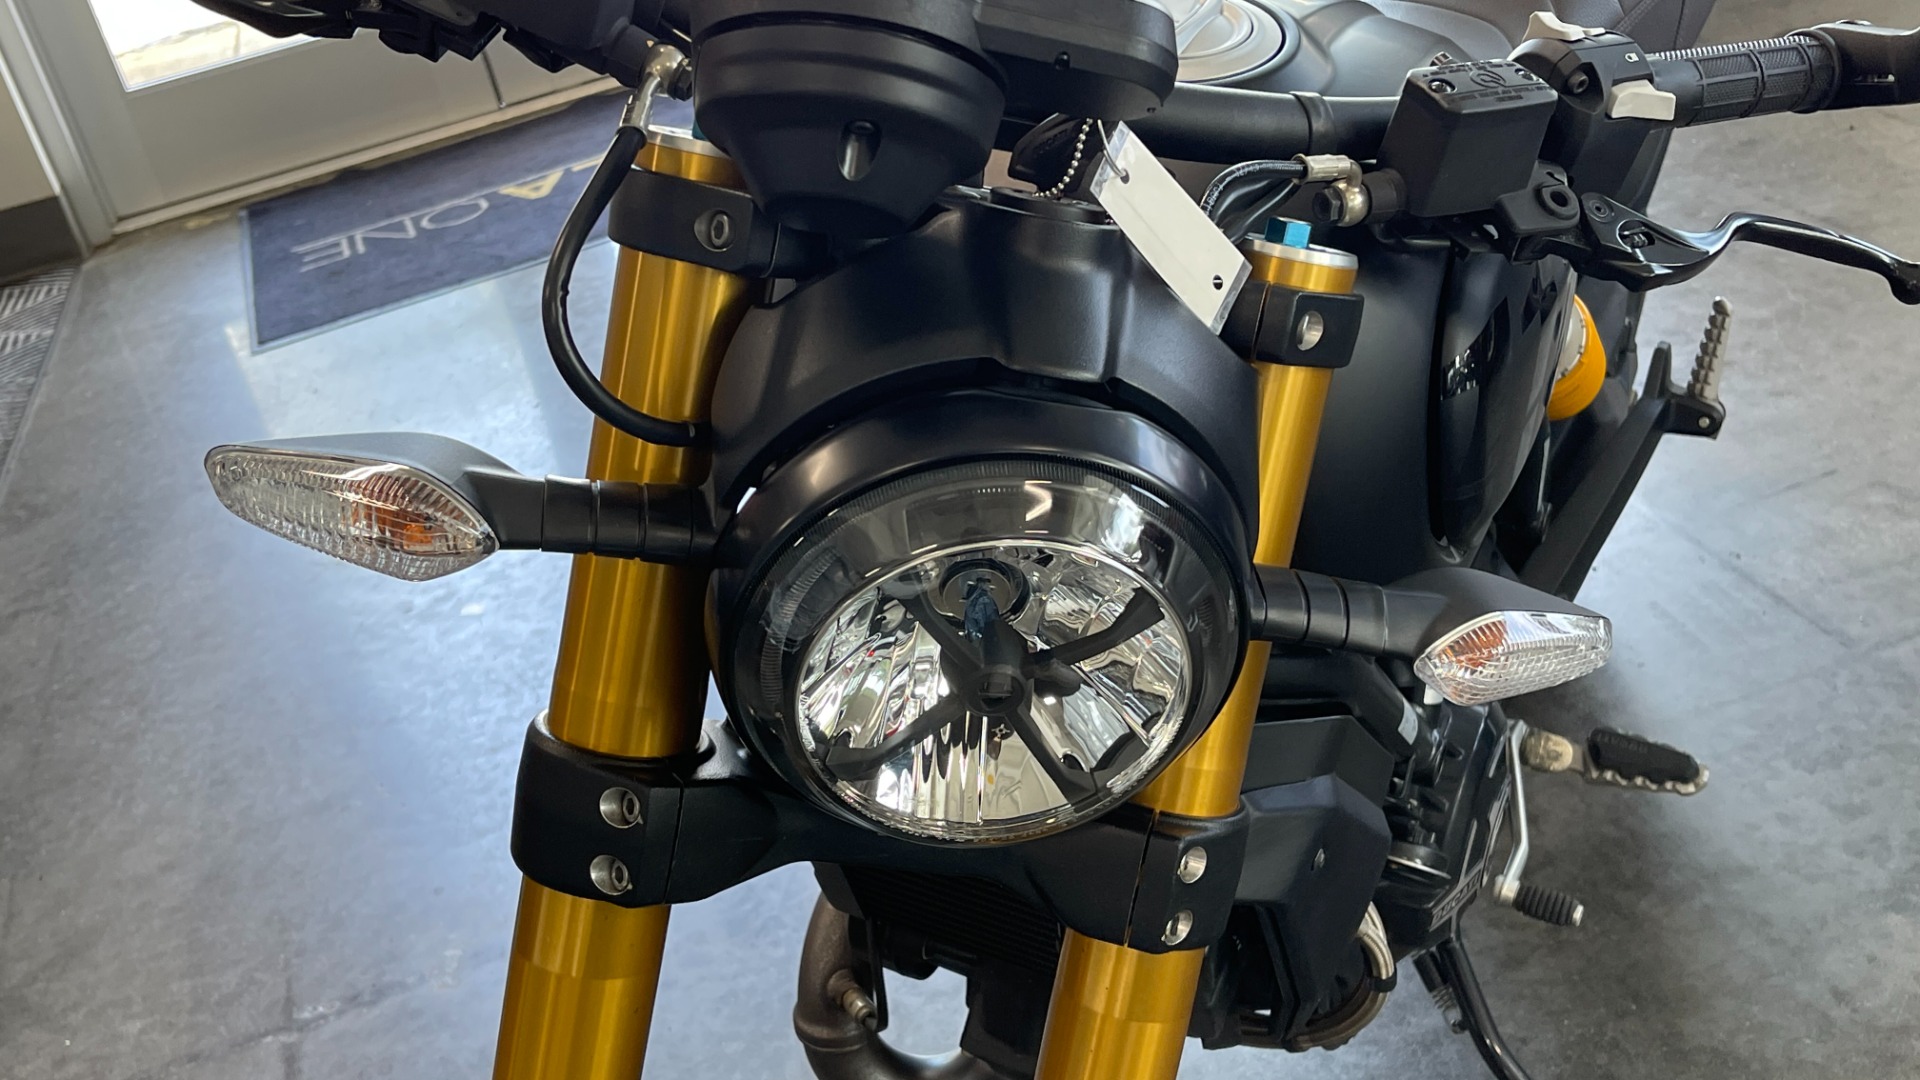 Used 2020 DUCATI SCRAMBLER 1100 SPORT PRO for sale Sold at Formula Imports in Charlotte NC 28227 8